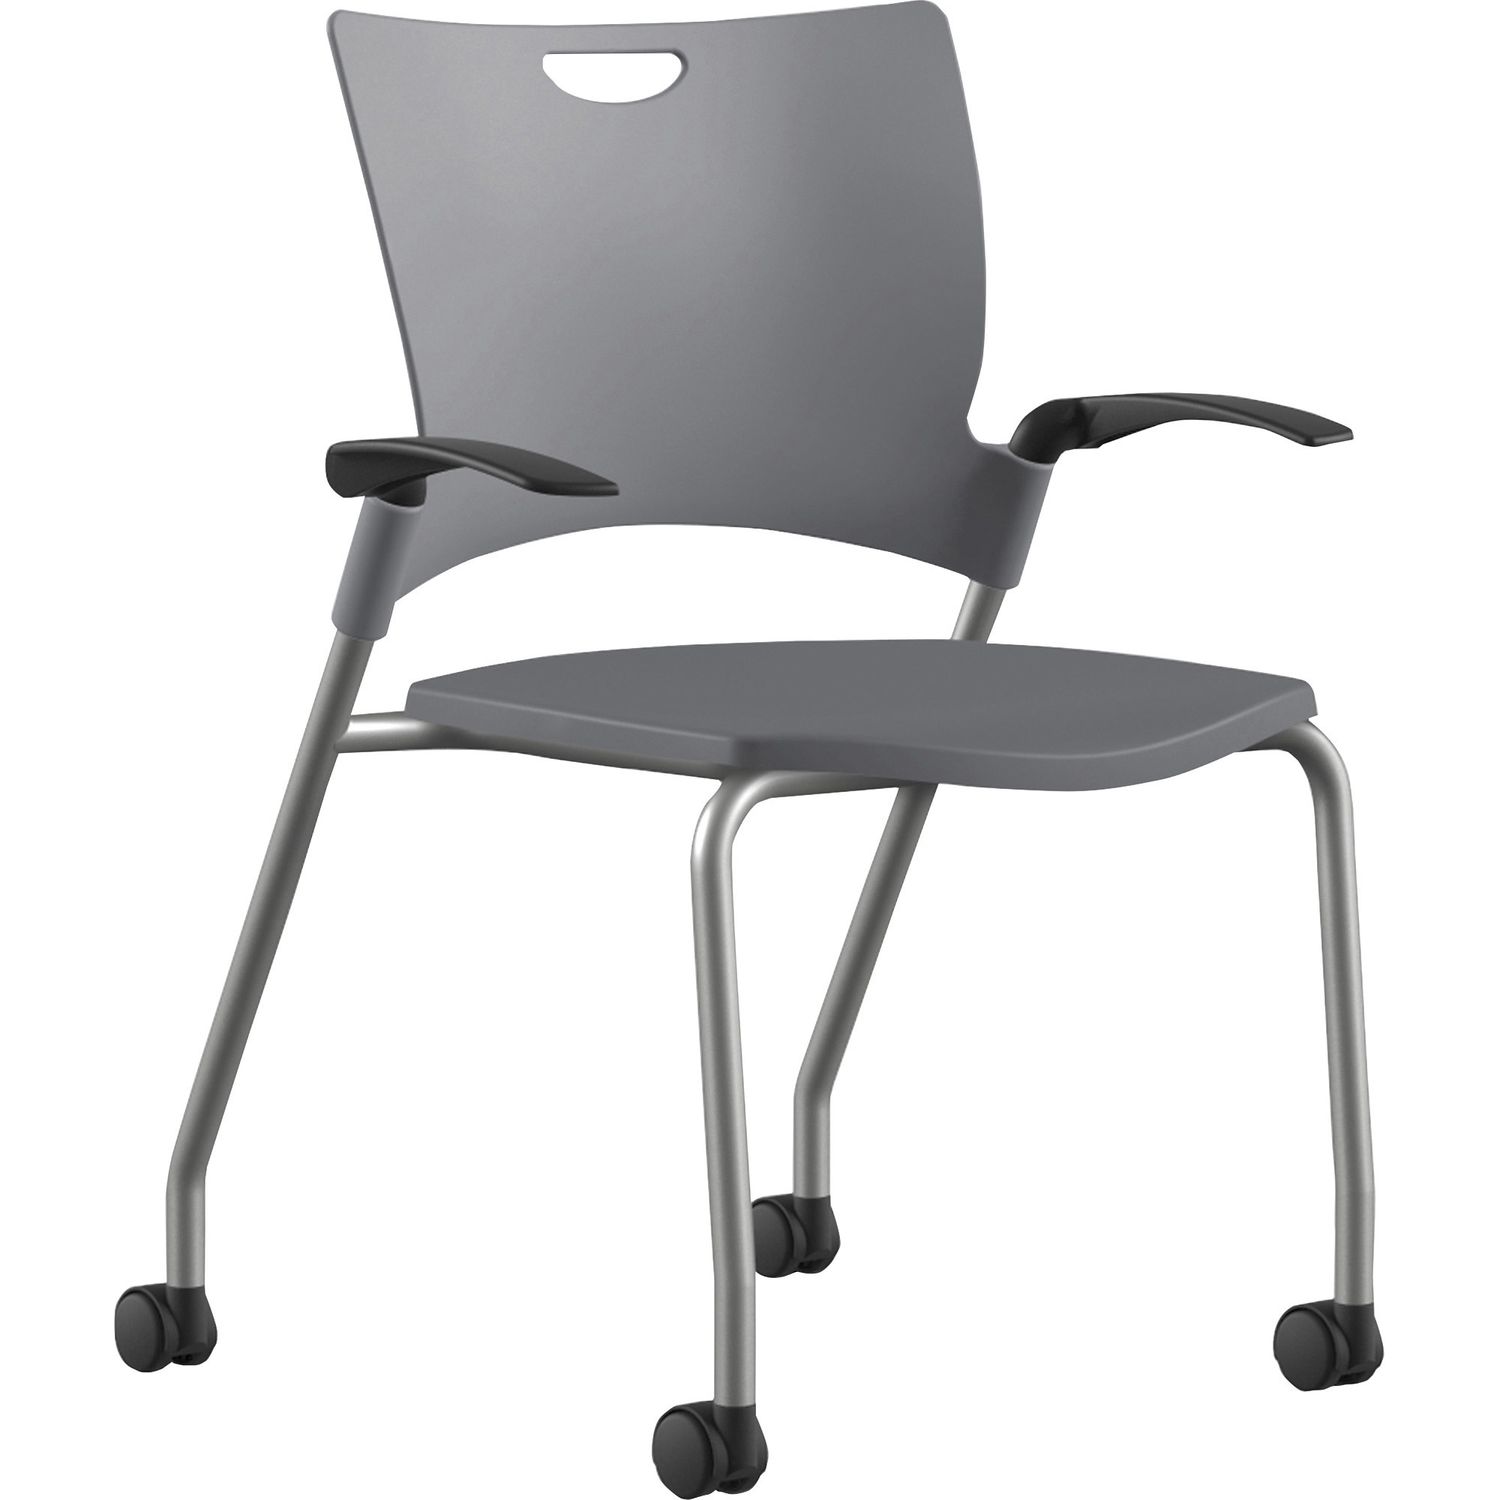 Bella Fixed Arms Mobile Stack Chair Dove Thermoplastic Seat, Dove Gray Thermoplastic Back, Powder Coated, Silver Frame, Four-legged Base, 1 Each